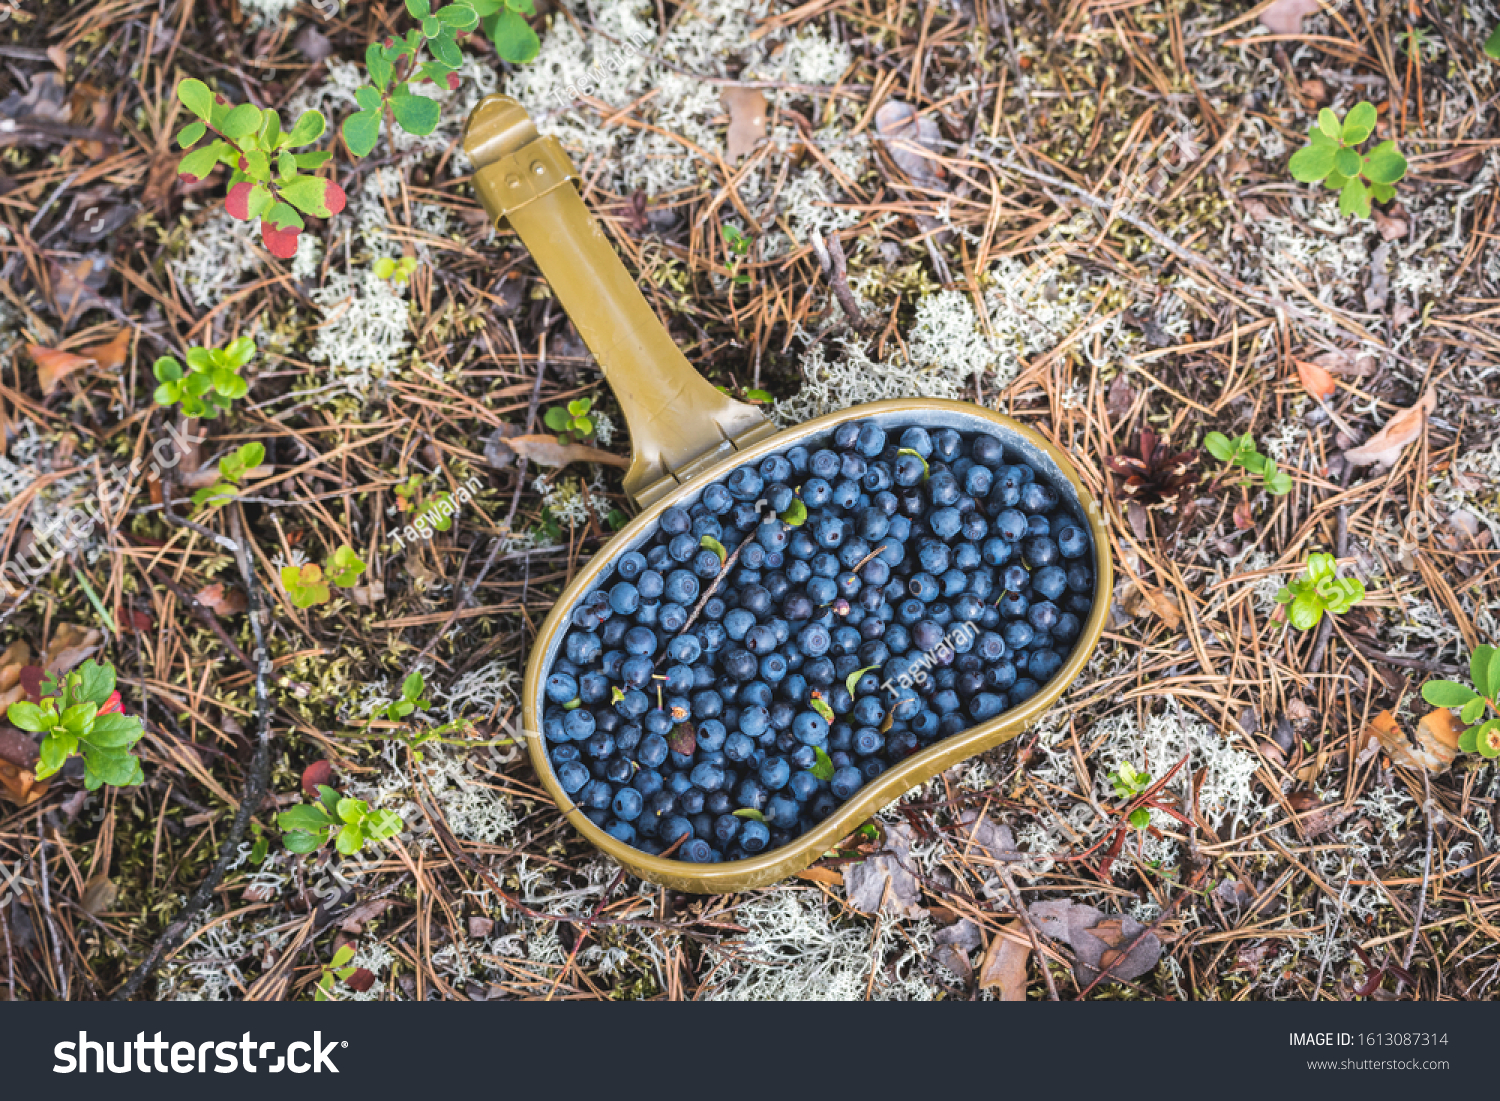 Fresh blueberries hand picked on swamp in an army bowler hat #1613087314